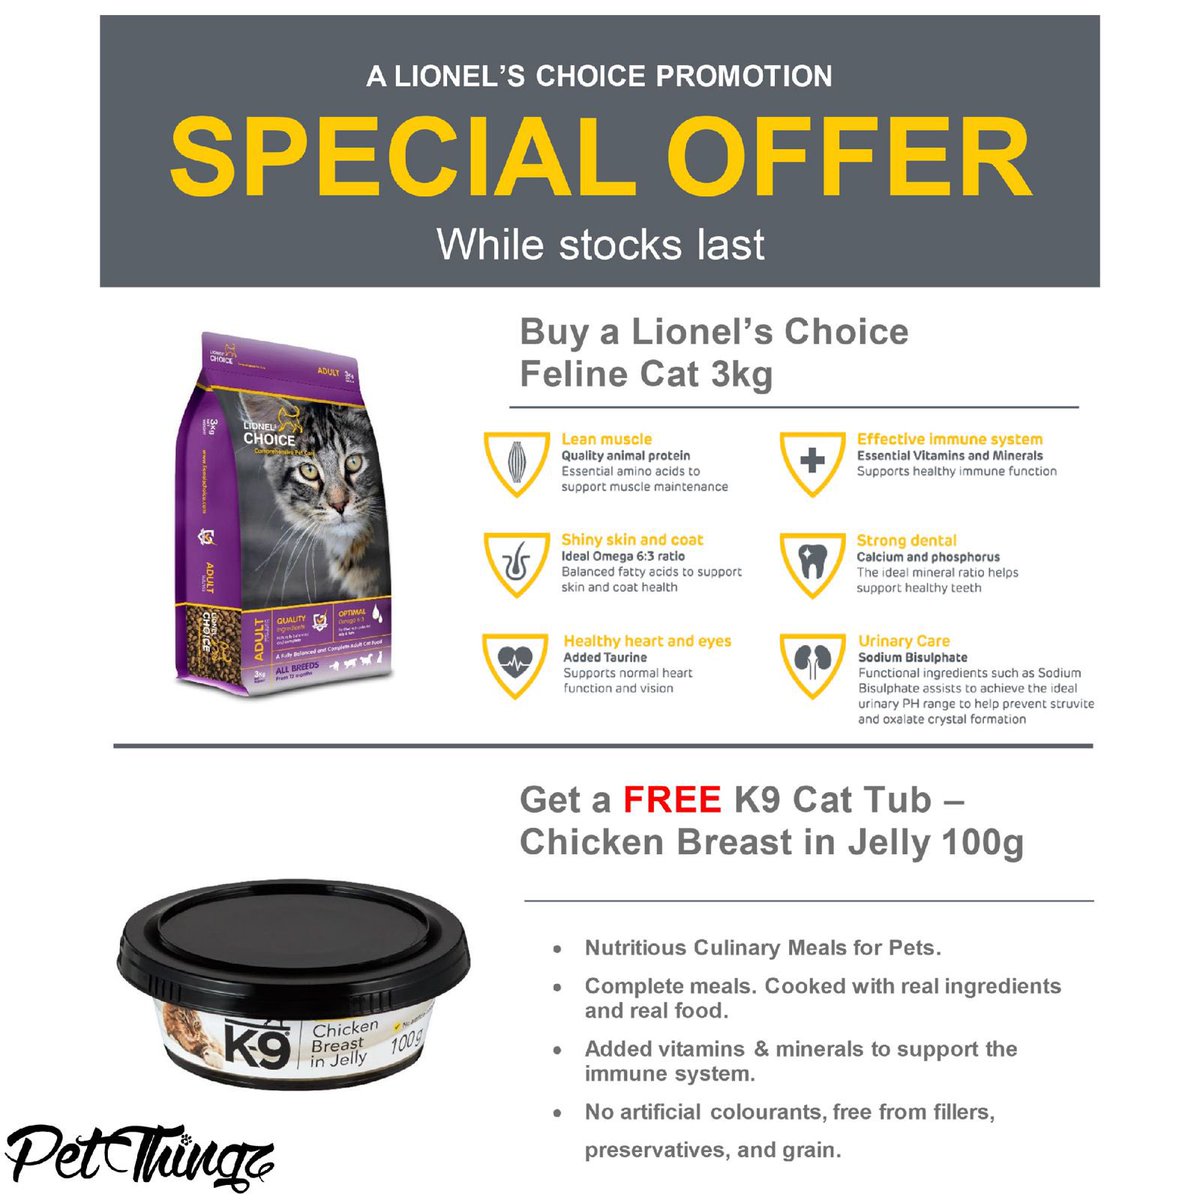 Lionels Choice Cat Food Promo available at Pet Thingz.
 
#lionelschoice #petthingz #catfood #promo #local #locallyproduced #petfriendlystore #itsacatslife #availablenow #whilestockslast #likeandfollow
#capetown #LifestyleOnKloof #ShopDineExplore #RetailTherapy #FashionFinds